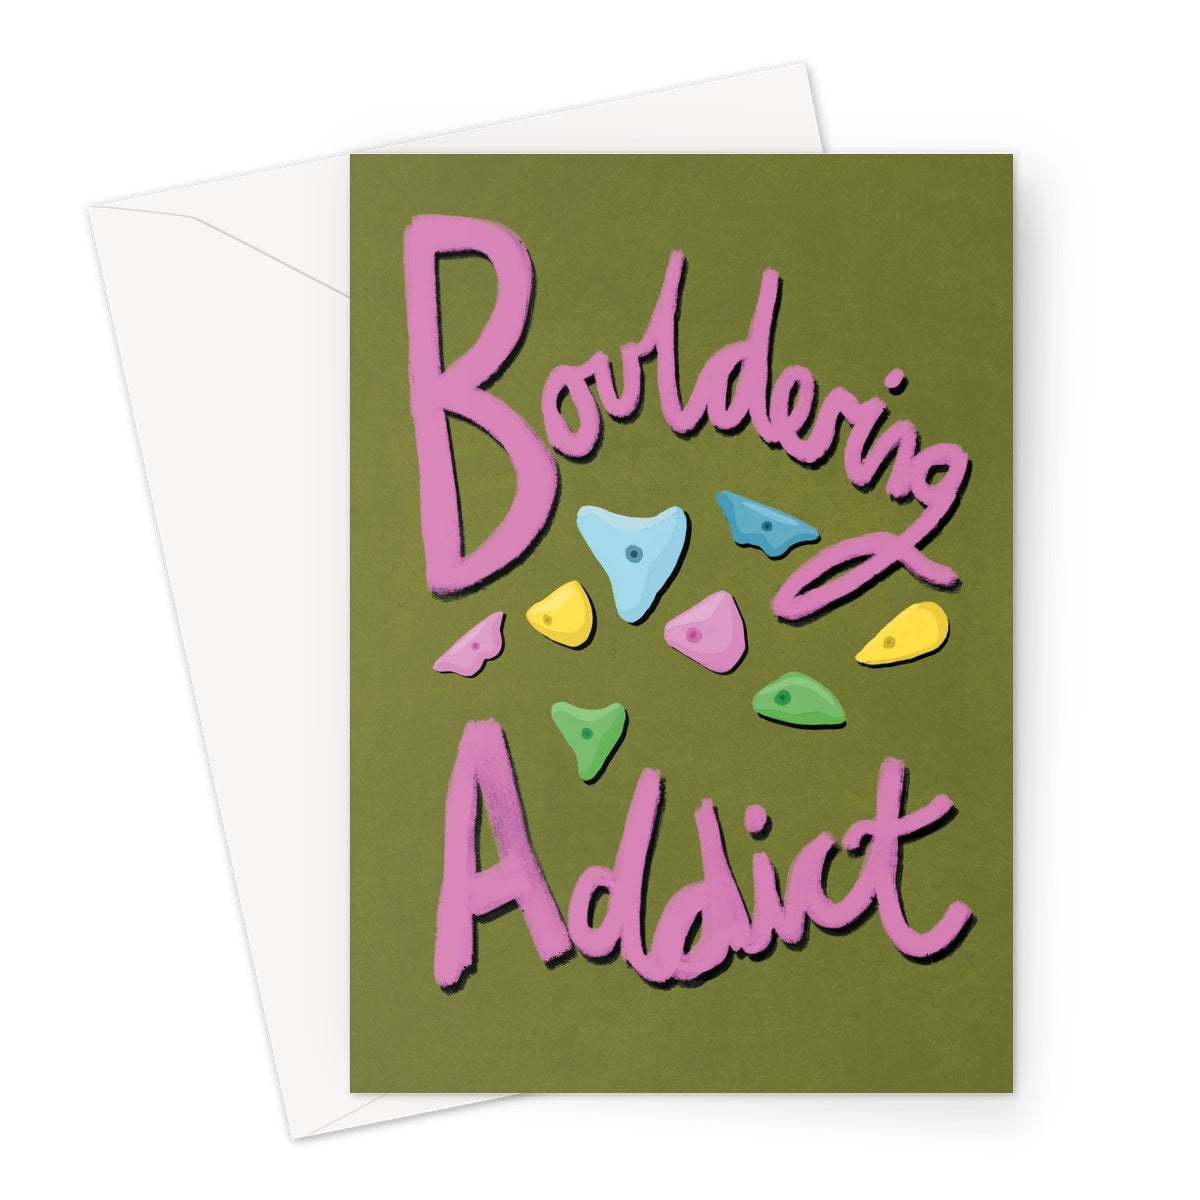 Bouldering Addict - Olive Green and Pink Greeting Card